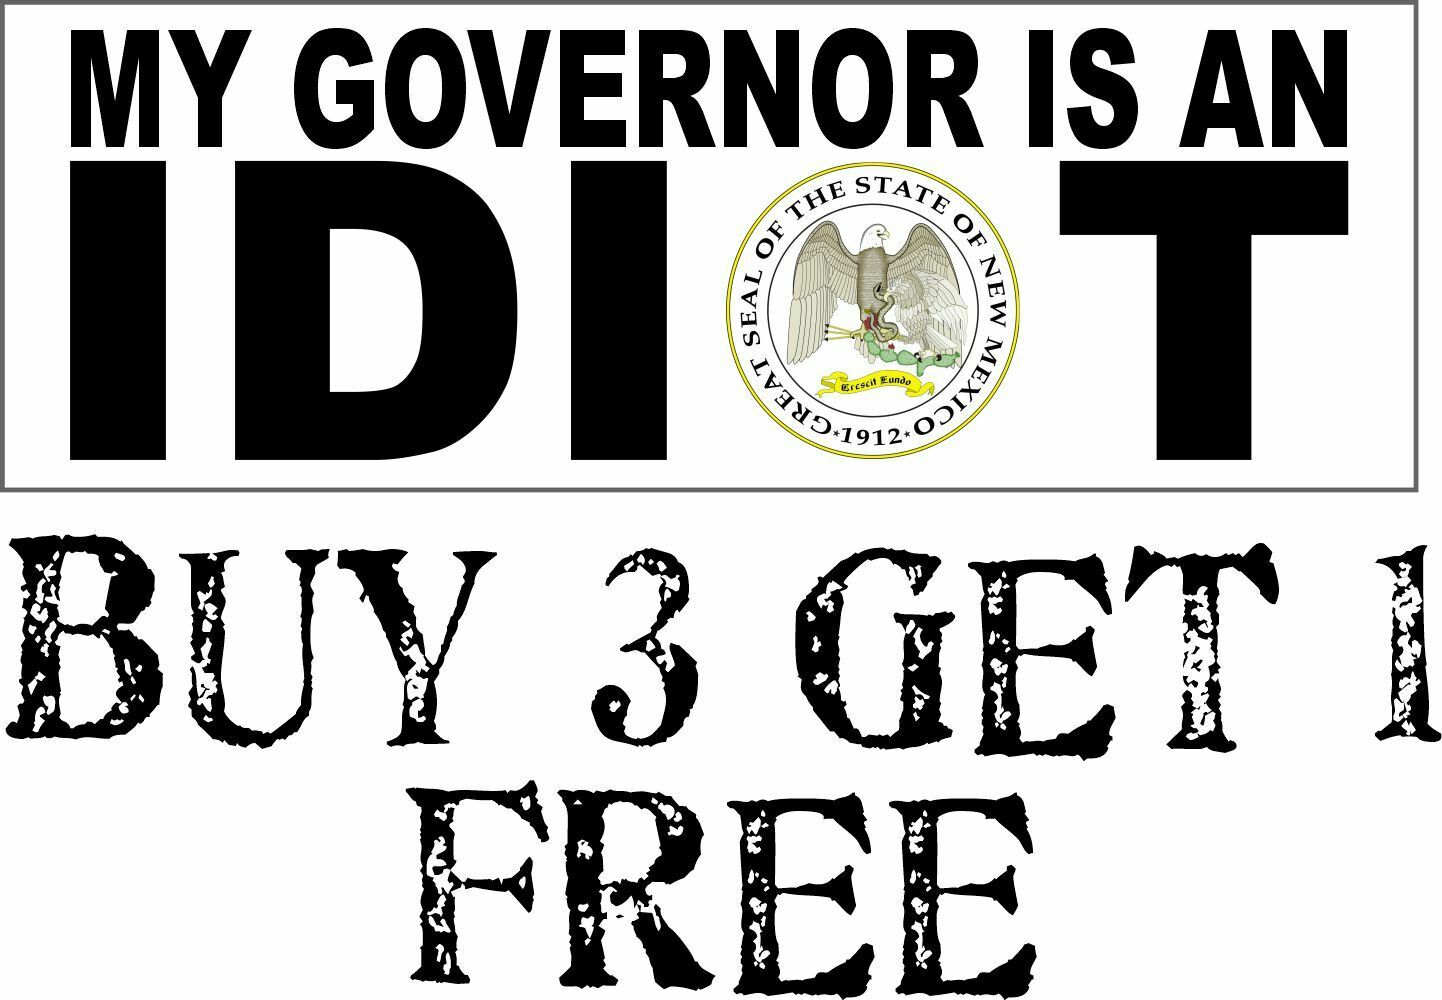 My governor is an idiot bumper sticker - New Mexico Version - 8.7" x 3" - Powercall Sirens LLC